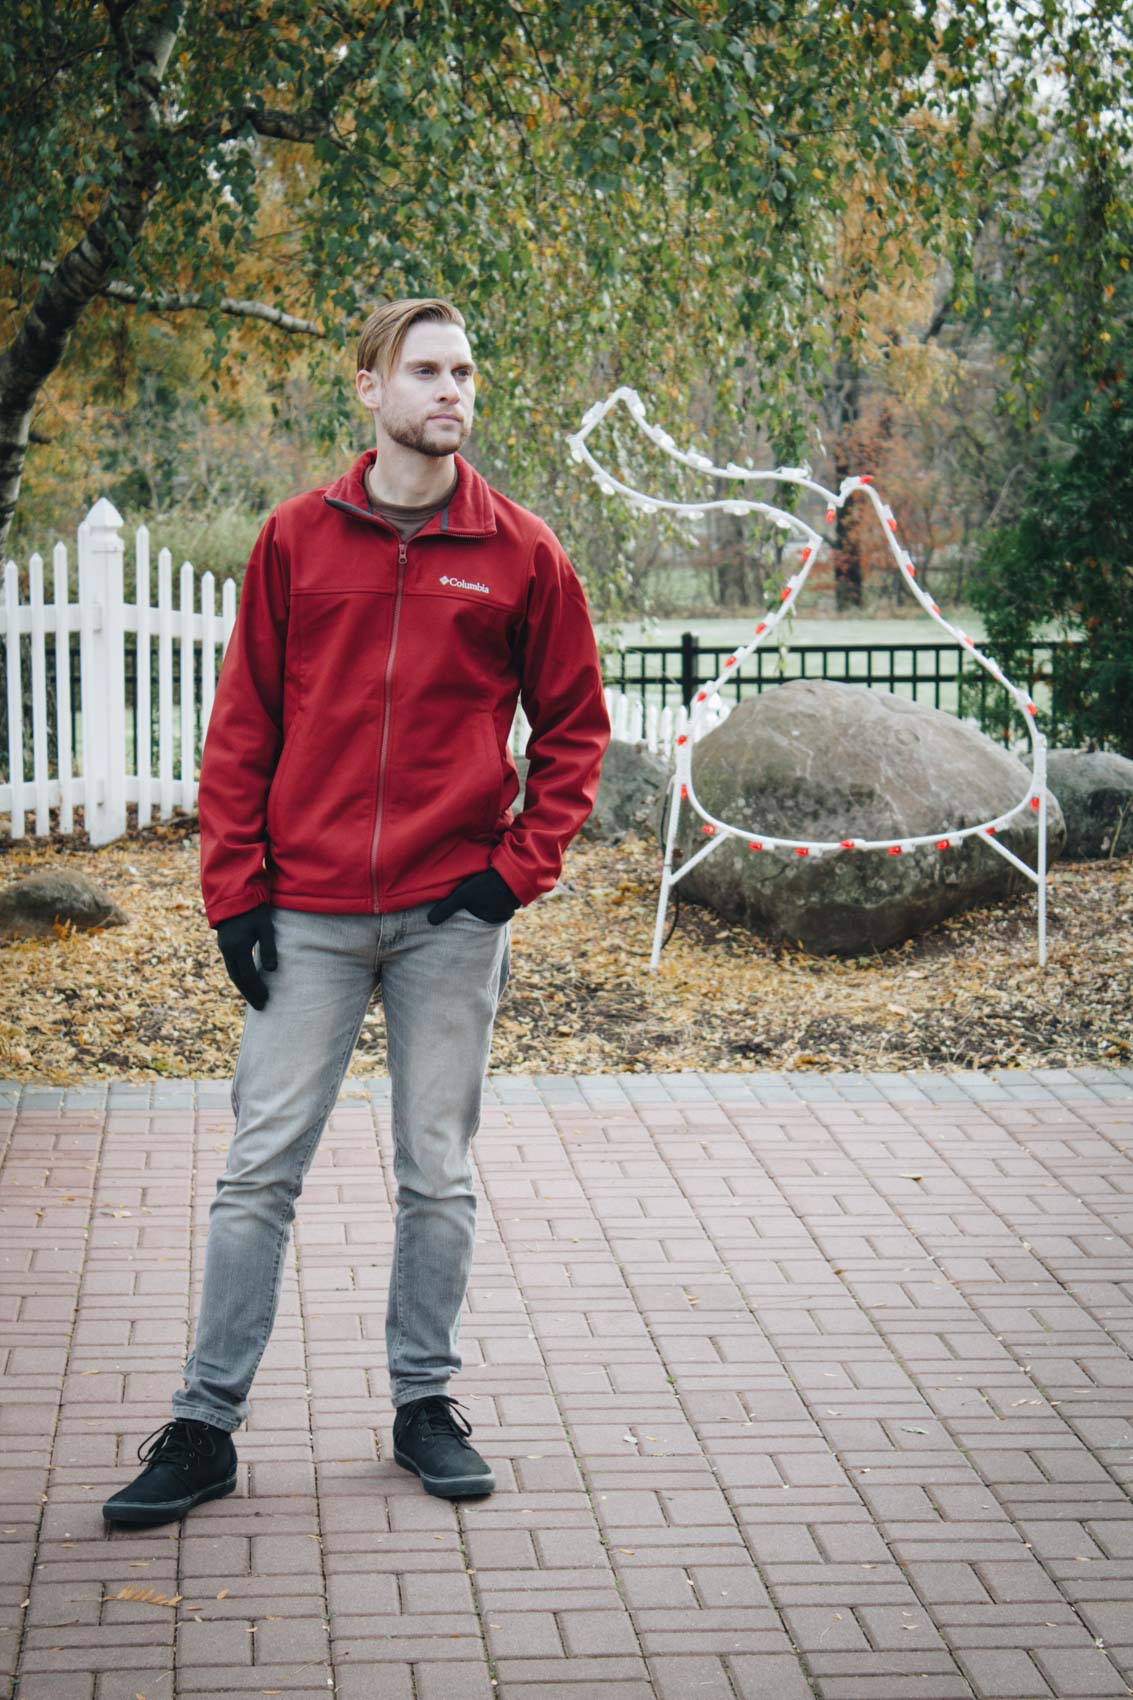 A sweet filled day at Hersheypark's Christmas Candylane. #mensfashion